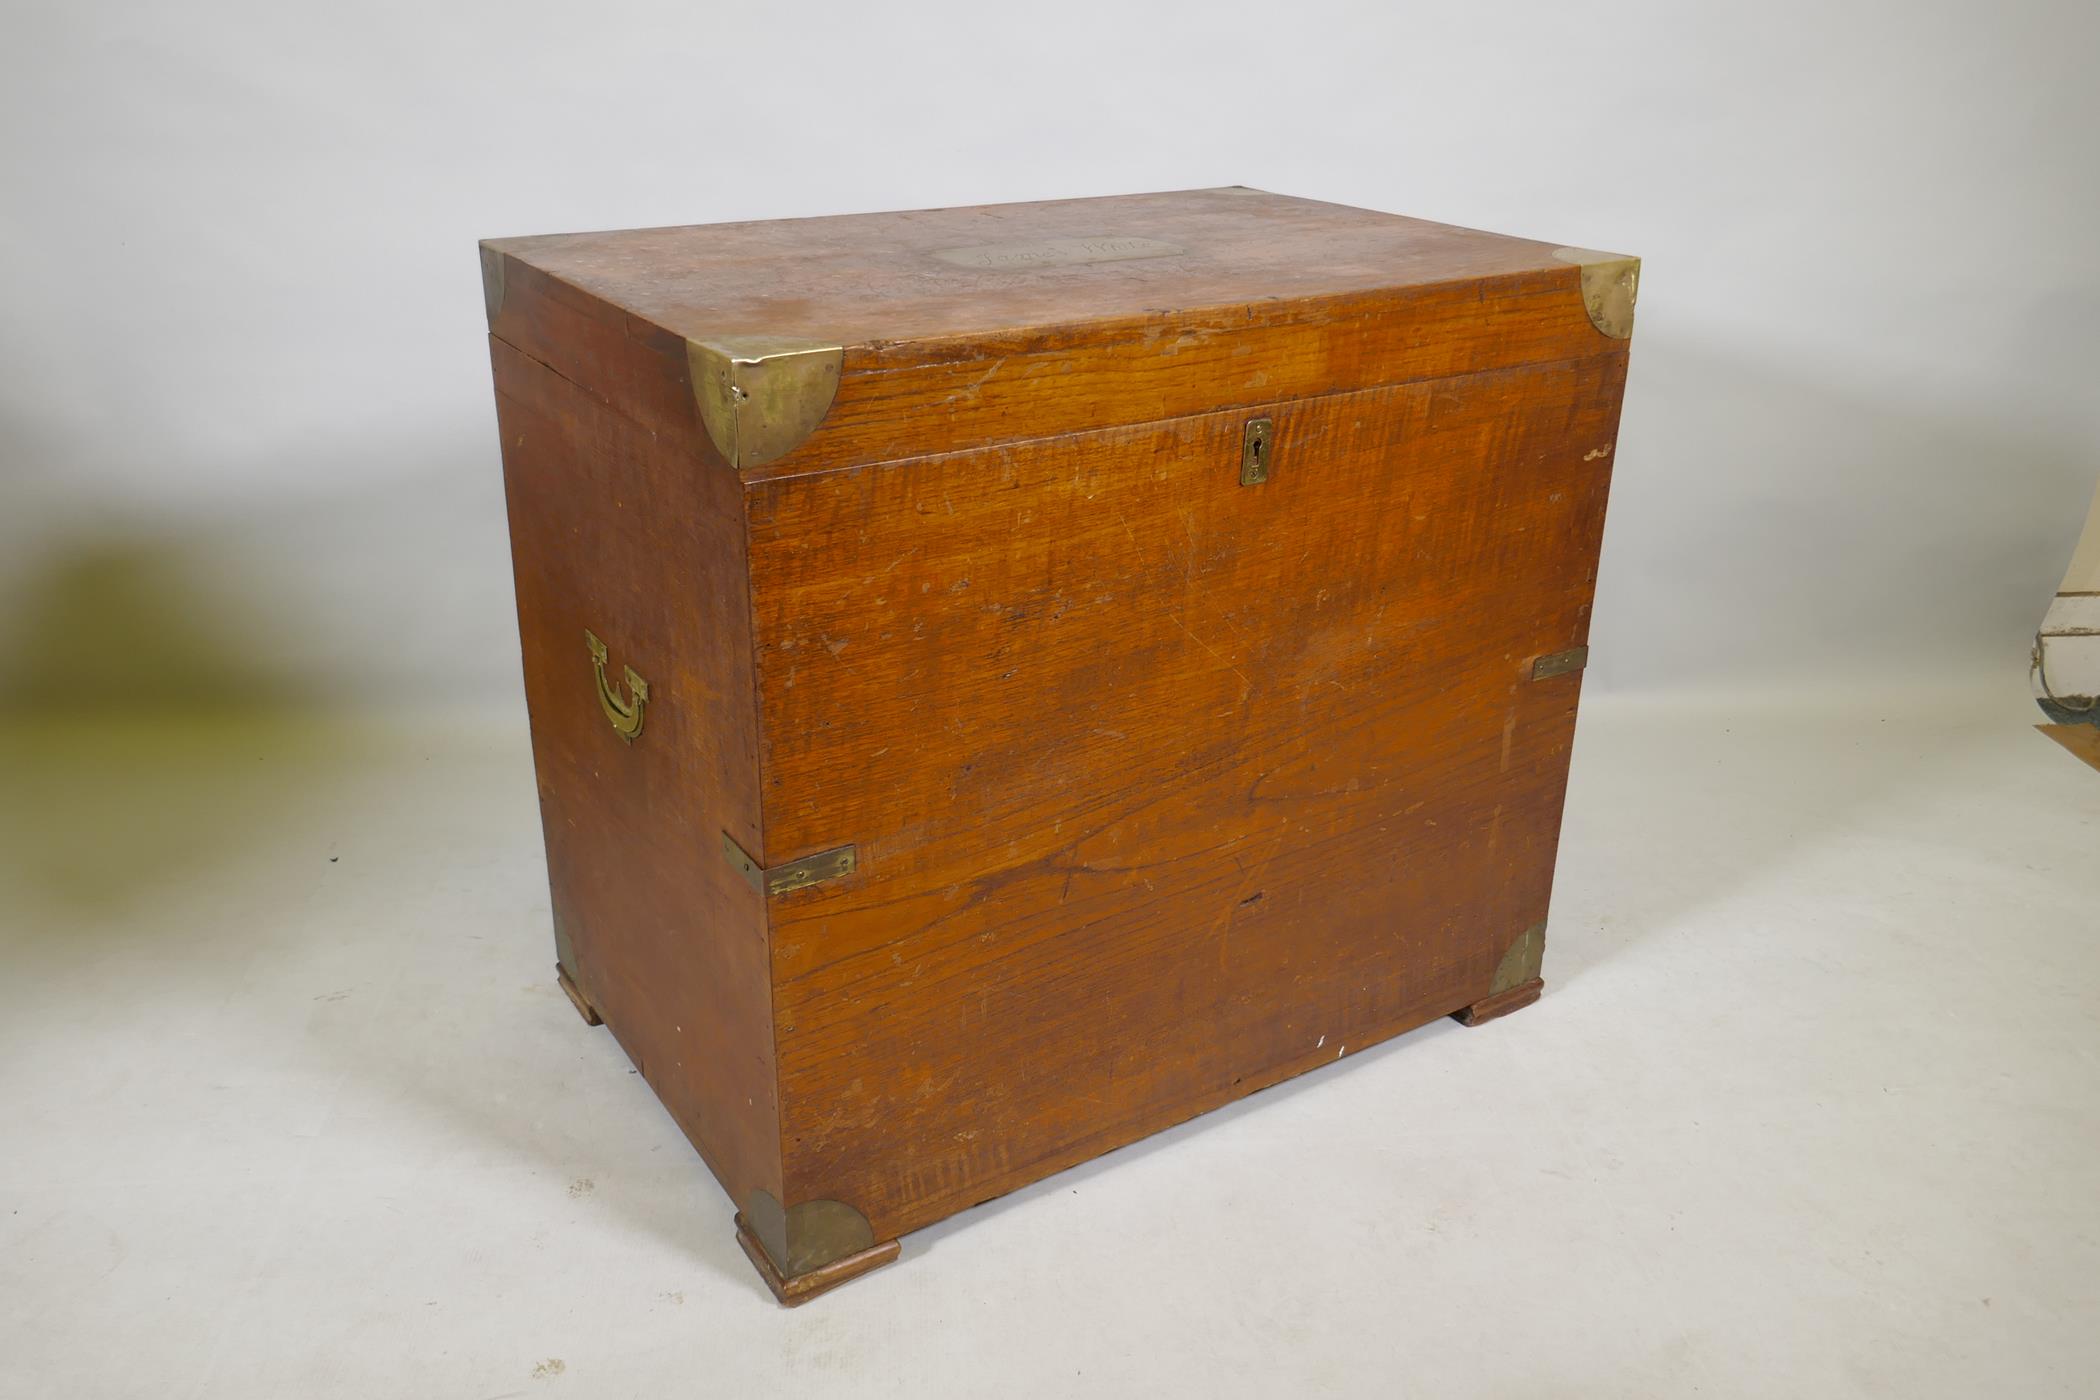 A C19th teak silver chest with campaign/military style brass mounts and handles and inset panel, - Image 5 of 5